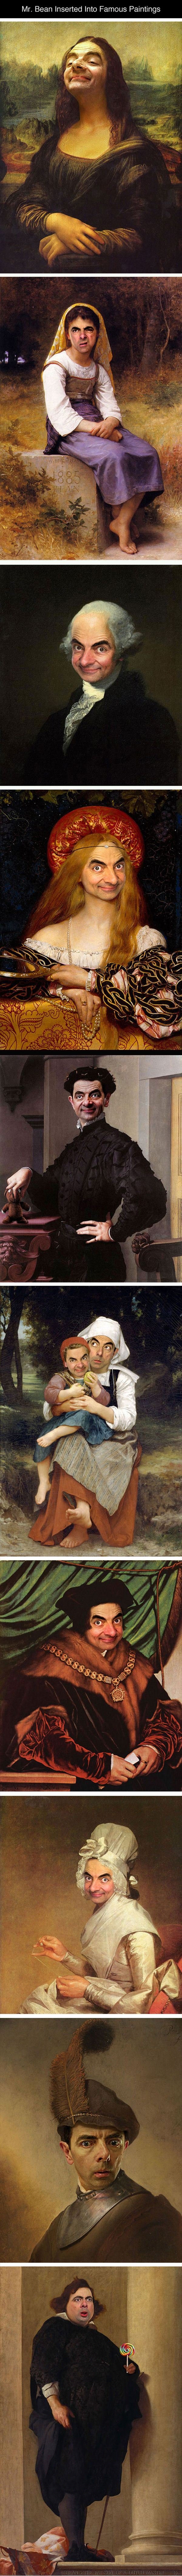 There. This looks better.. . Mr. Bean Inserted Into Famous Paintings rfi'. this is some 2009 facebook . Aint gon lie, this is funny tho.